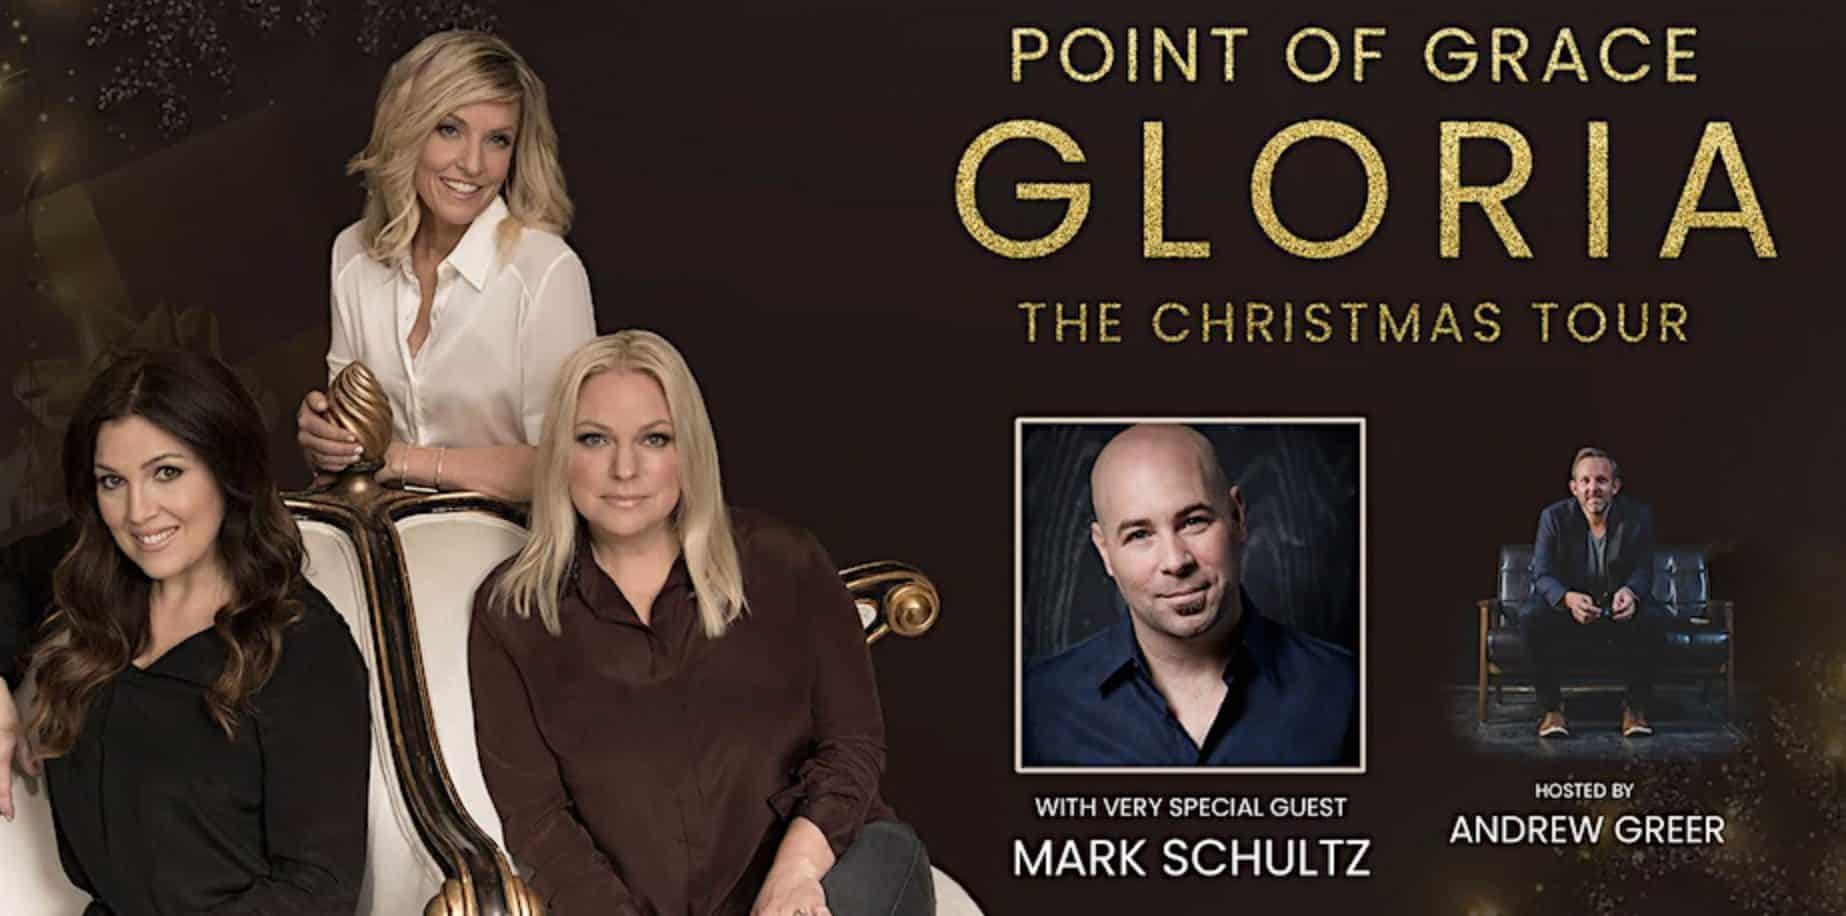 Point of Grace - Gloria The Christmas Tour (Brentwood, TN)